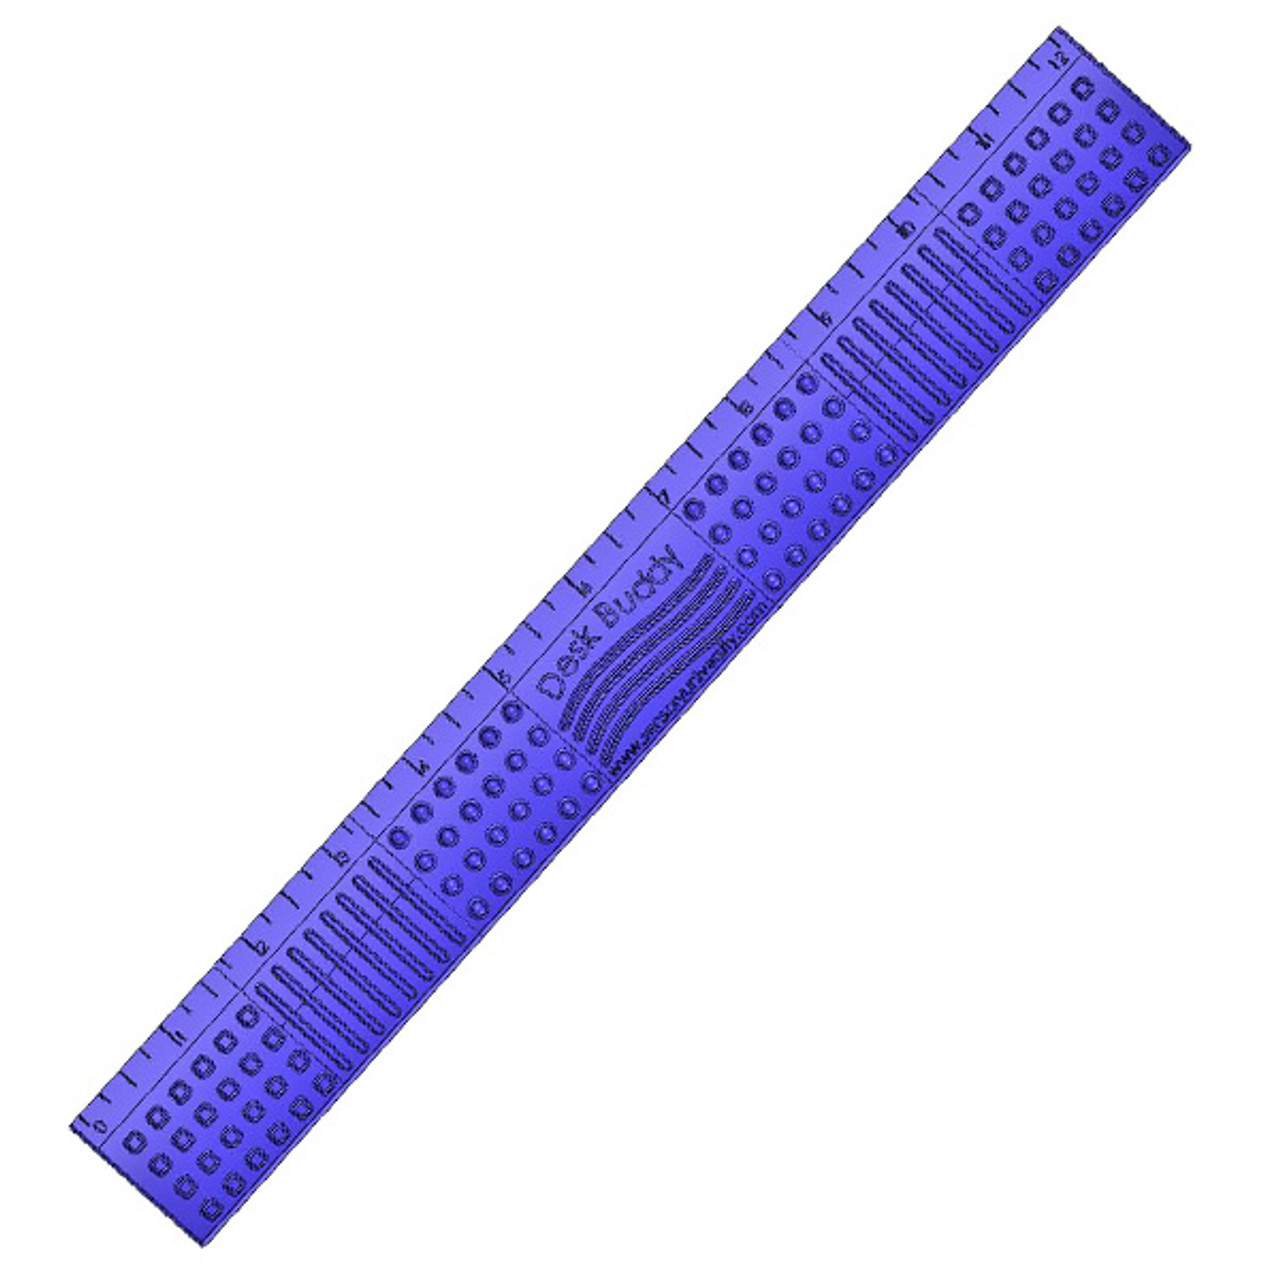 https://cdn11.bigcommerce.com/s-xs8po8dcgg/images/stencil/1280x1280/products/453/74/Desk_Buddy_Multi_Textured_Tactile_Chewable_Ruler__05825.1551505893.jpg?c=2